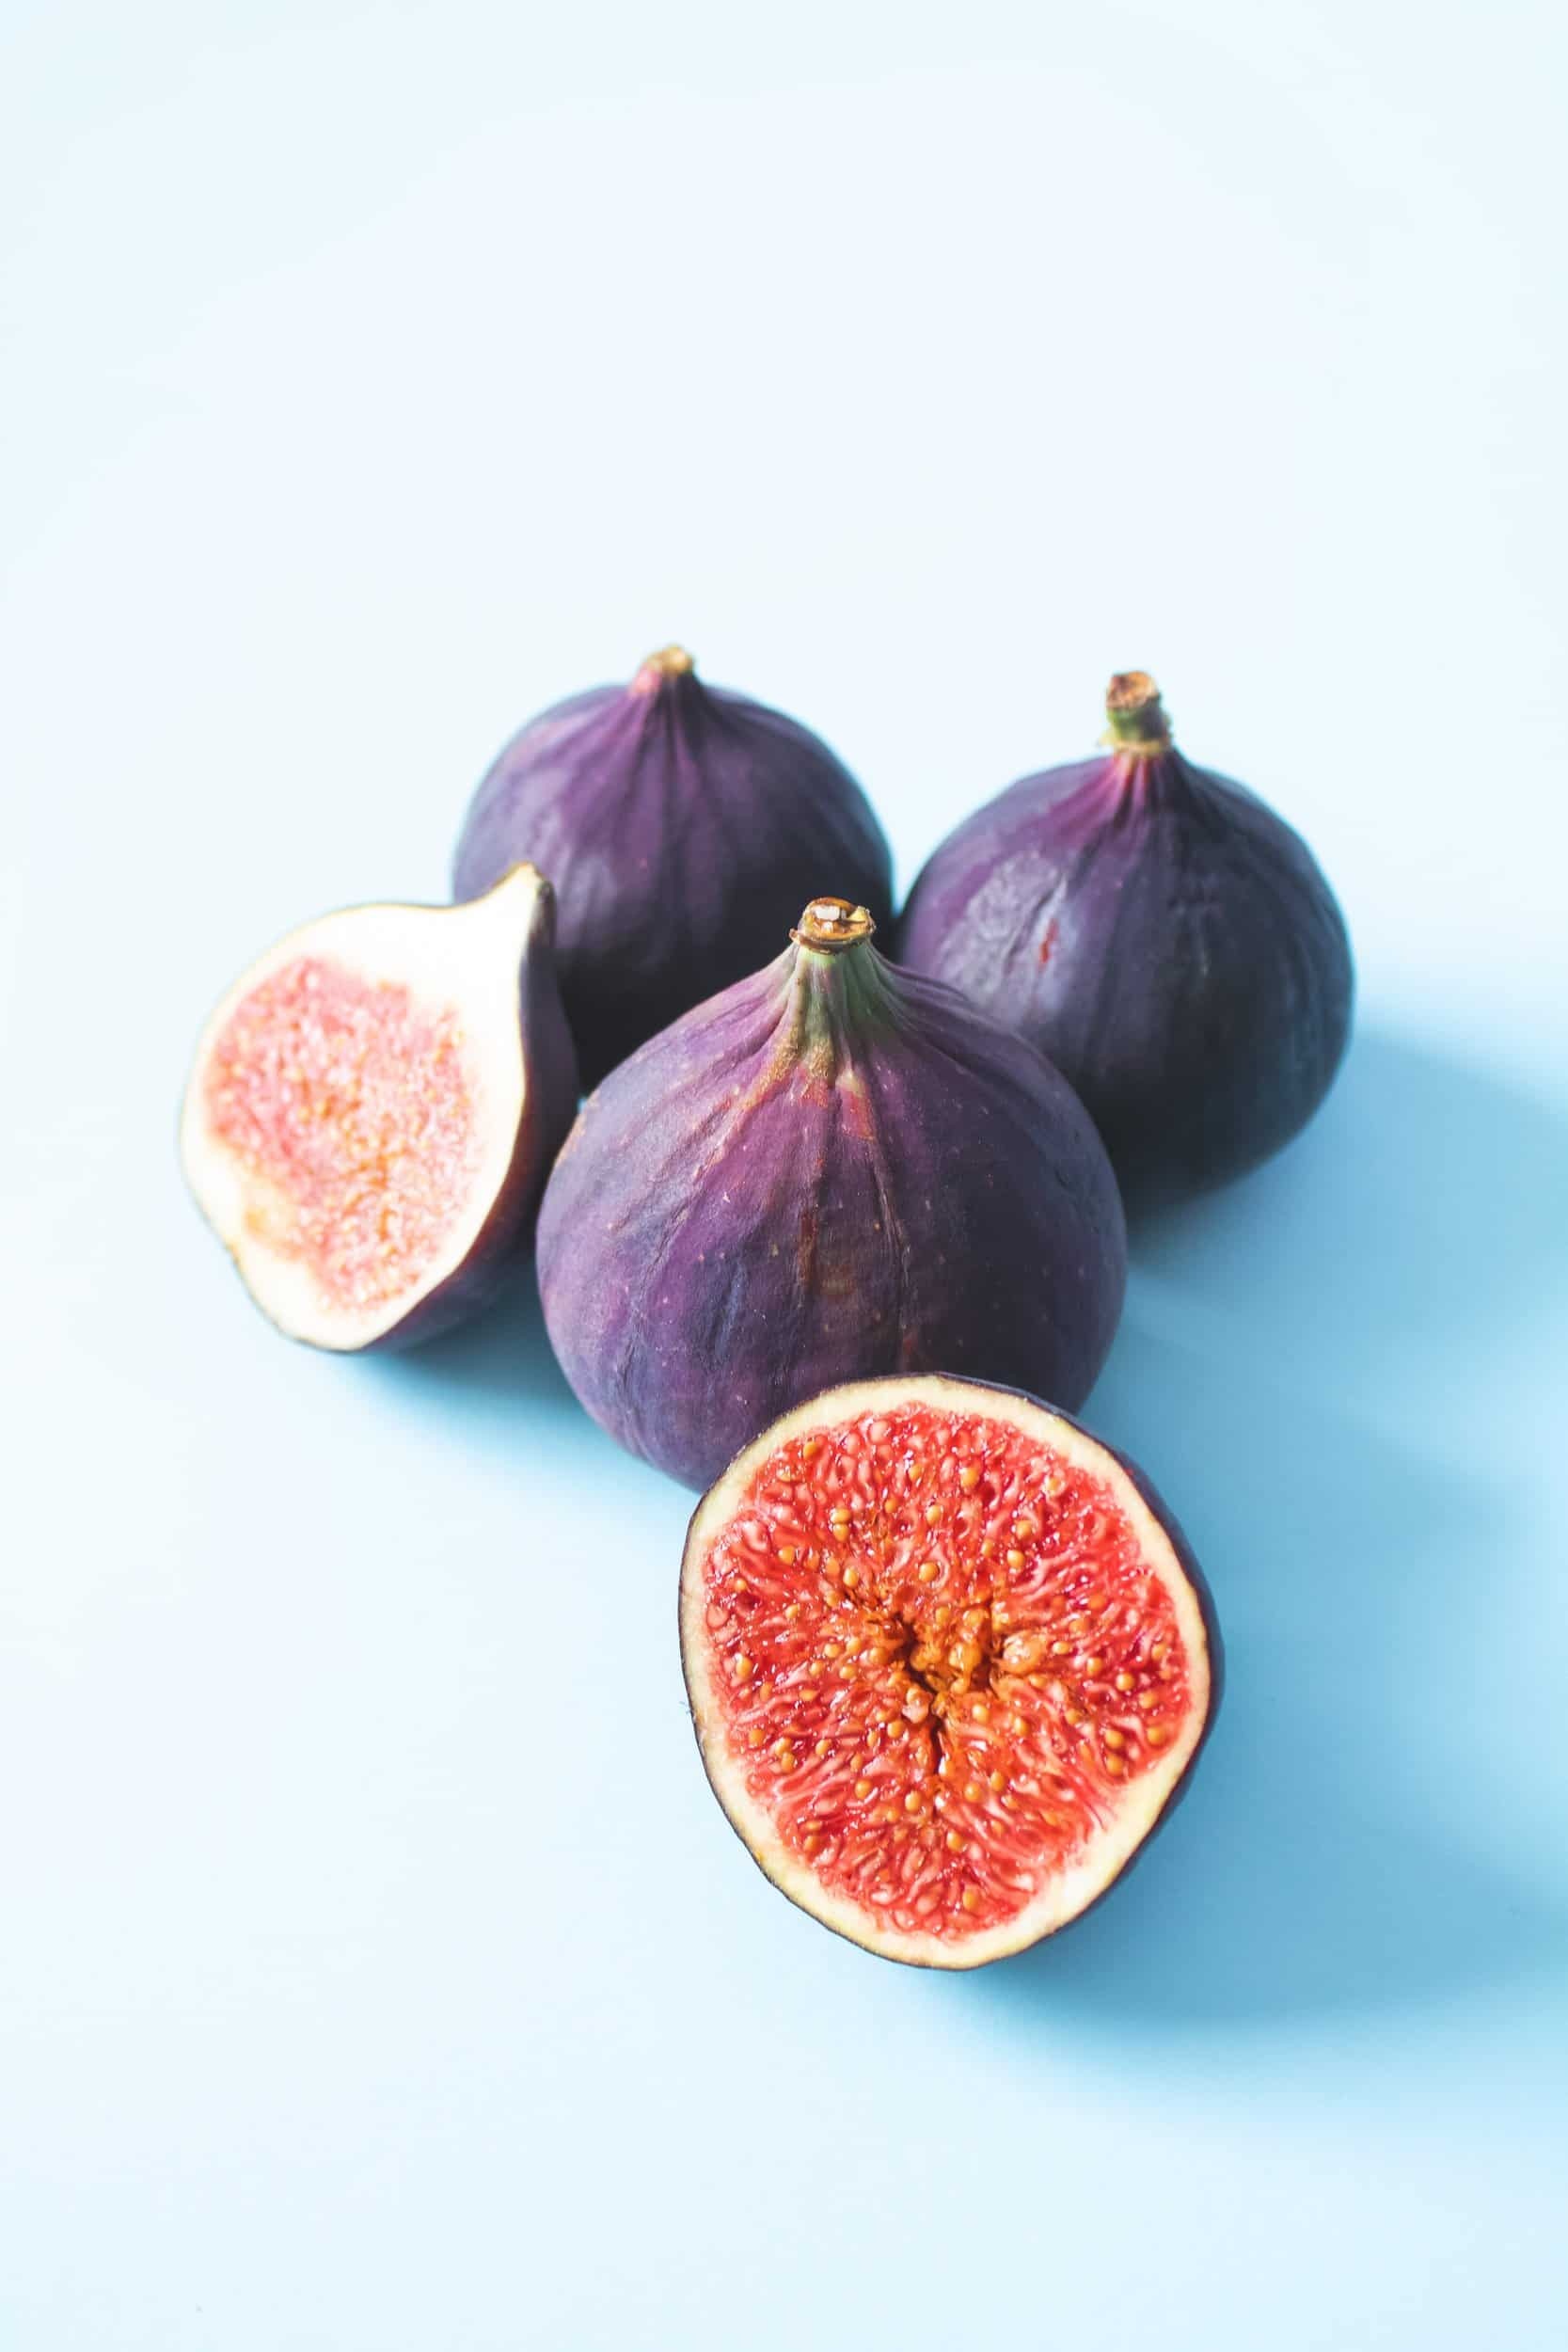 Fig: Contains significant amounts of calcium, potassium, phosphorus, and iron. 1670x2500 HD Background.